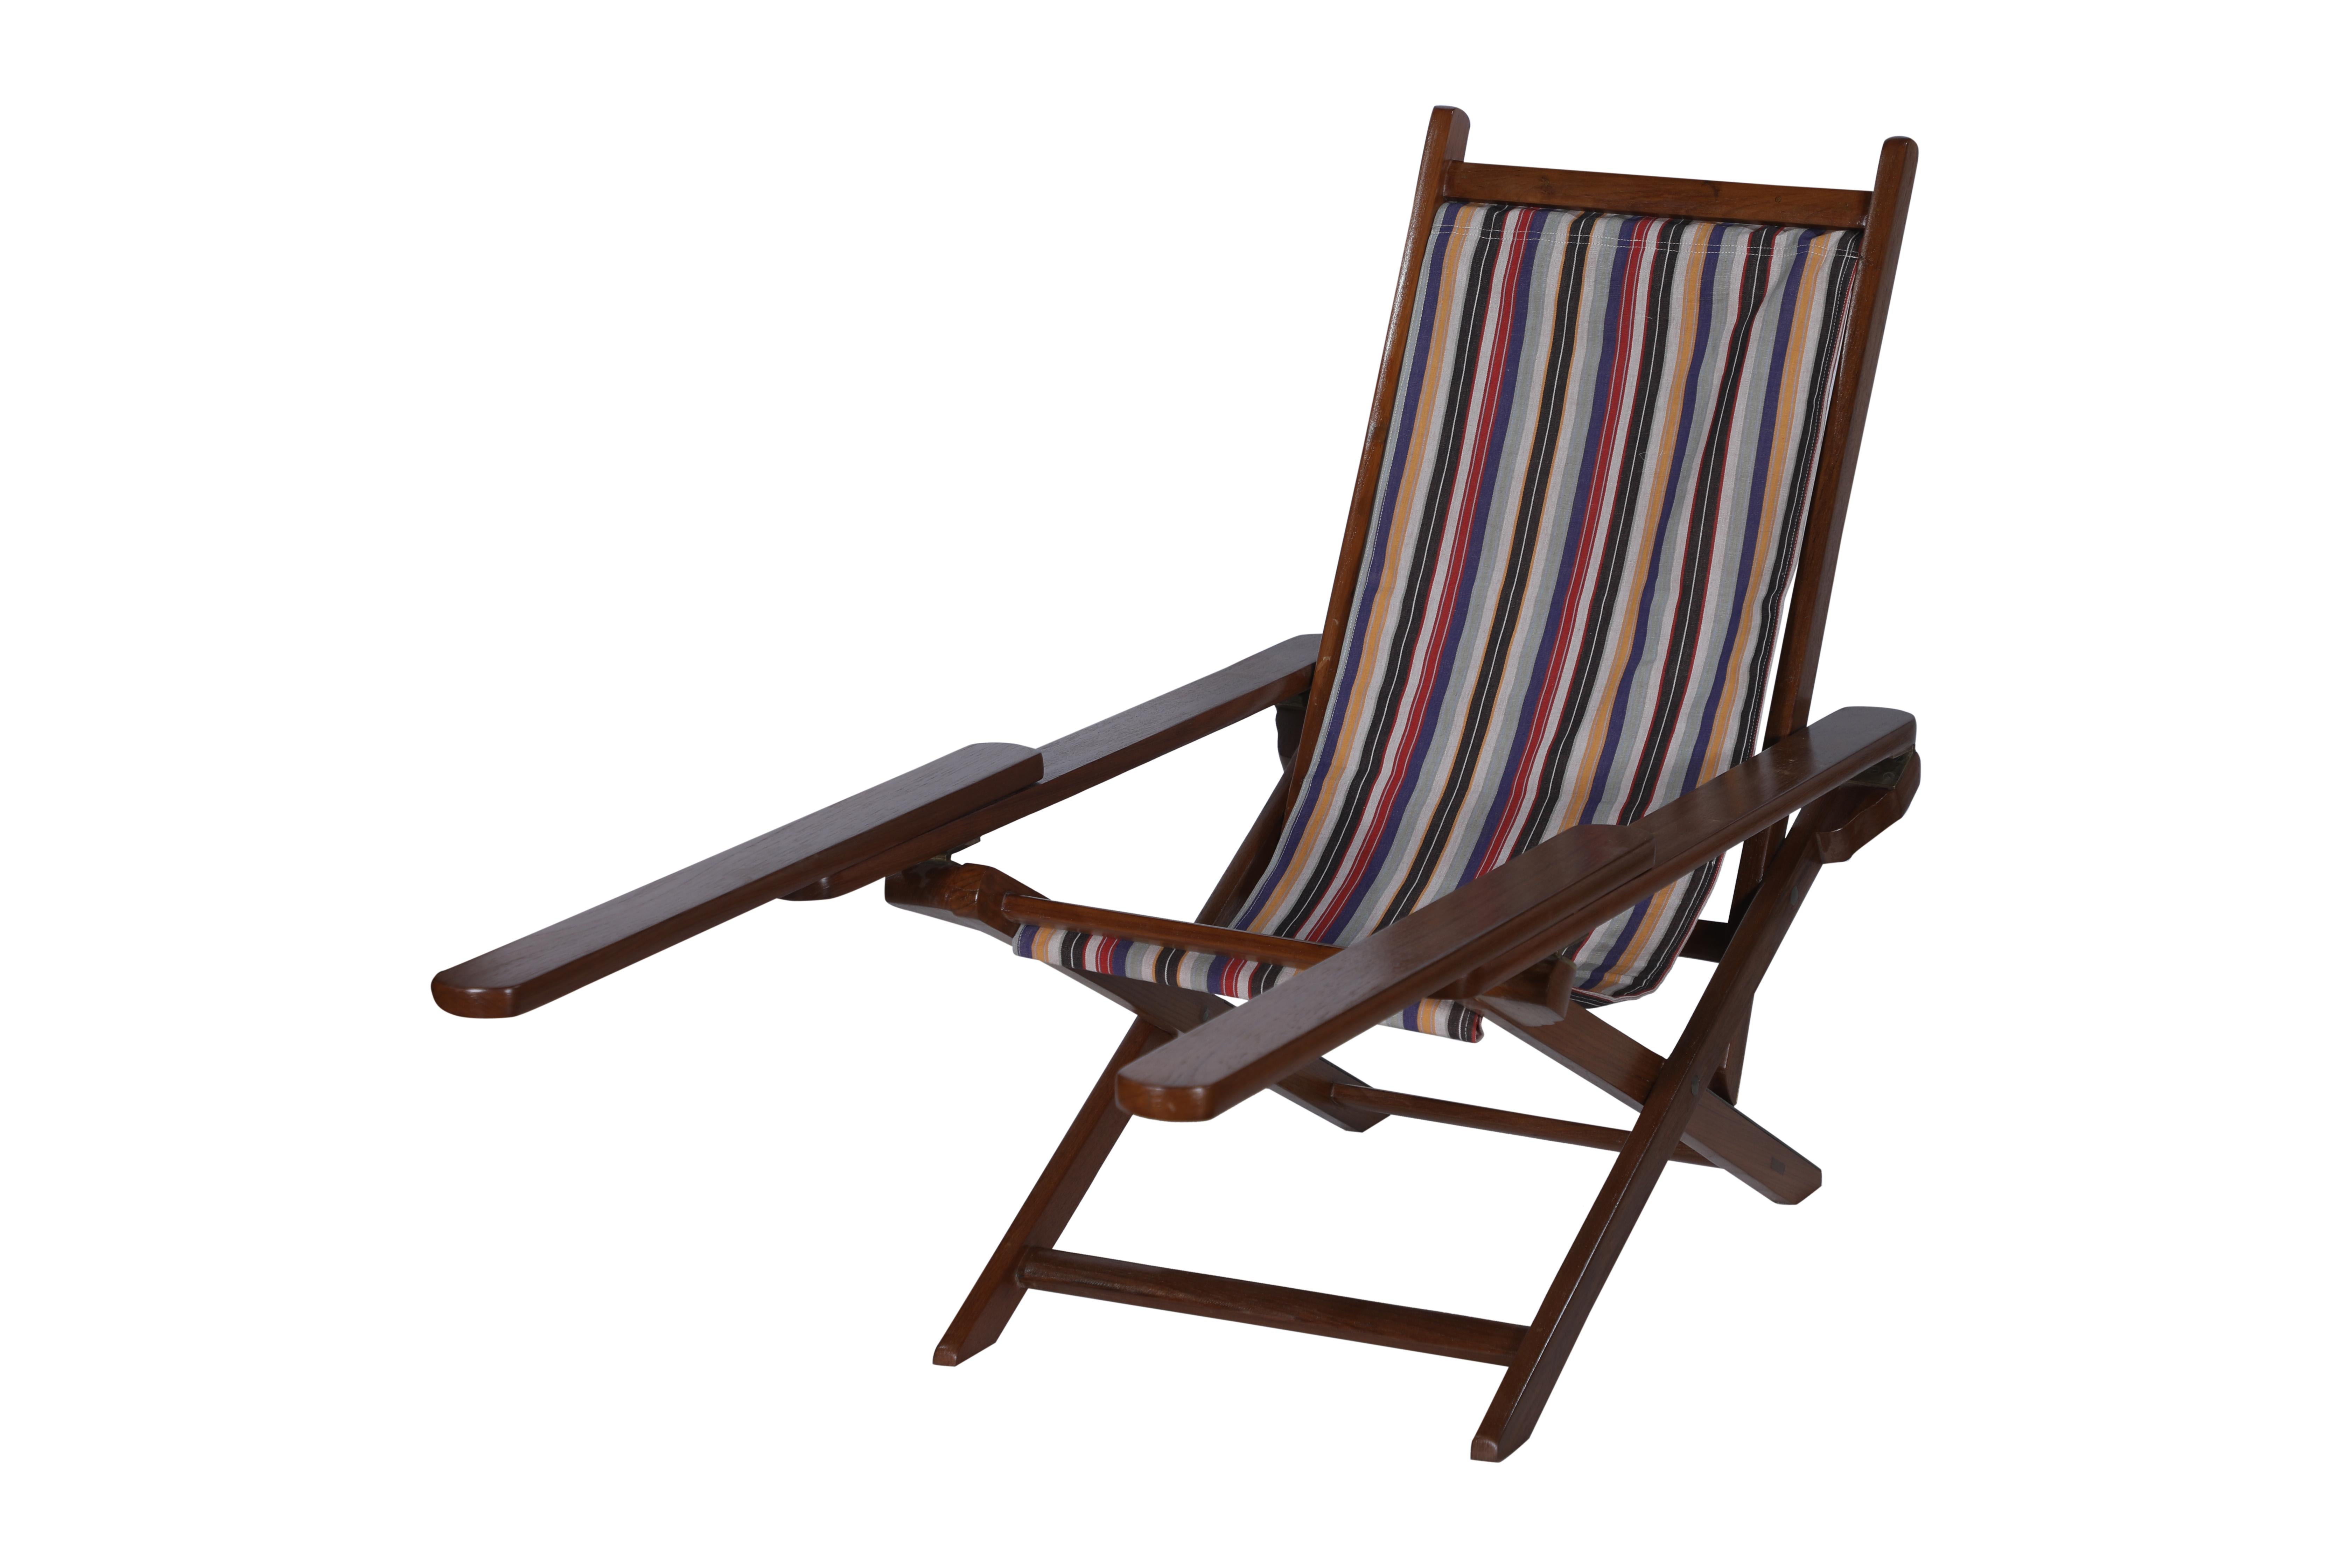 20th Century Pair of Canvas Sling-Back Campaign Folding, Adjustable Teak Chairs w/ Leg Rests